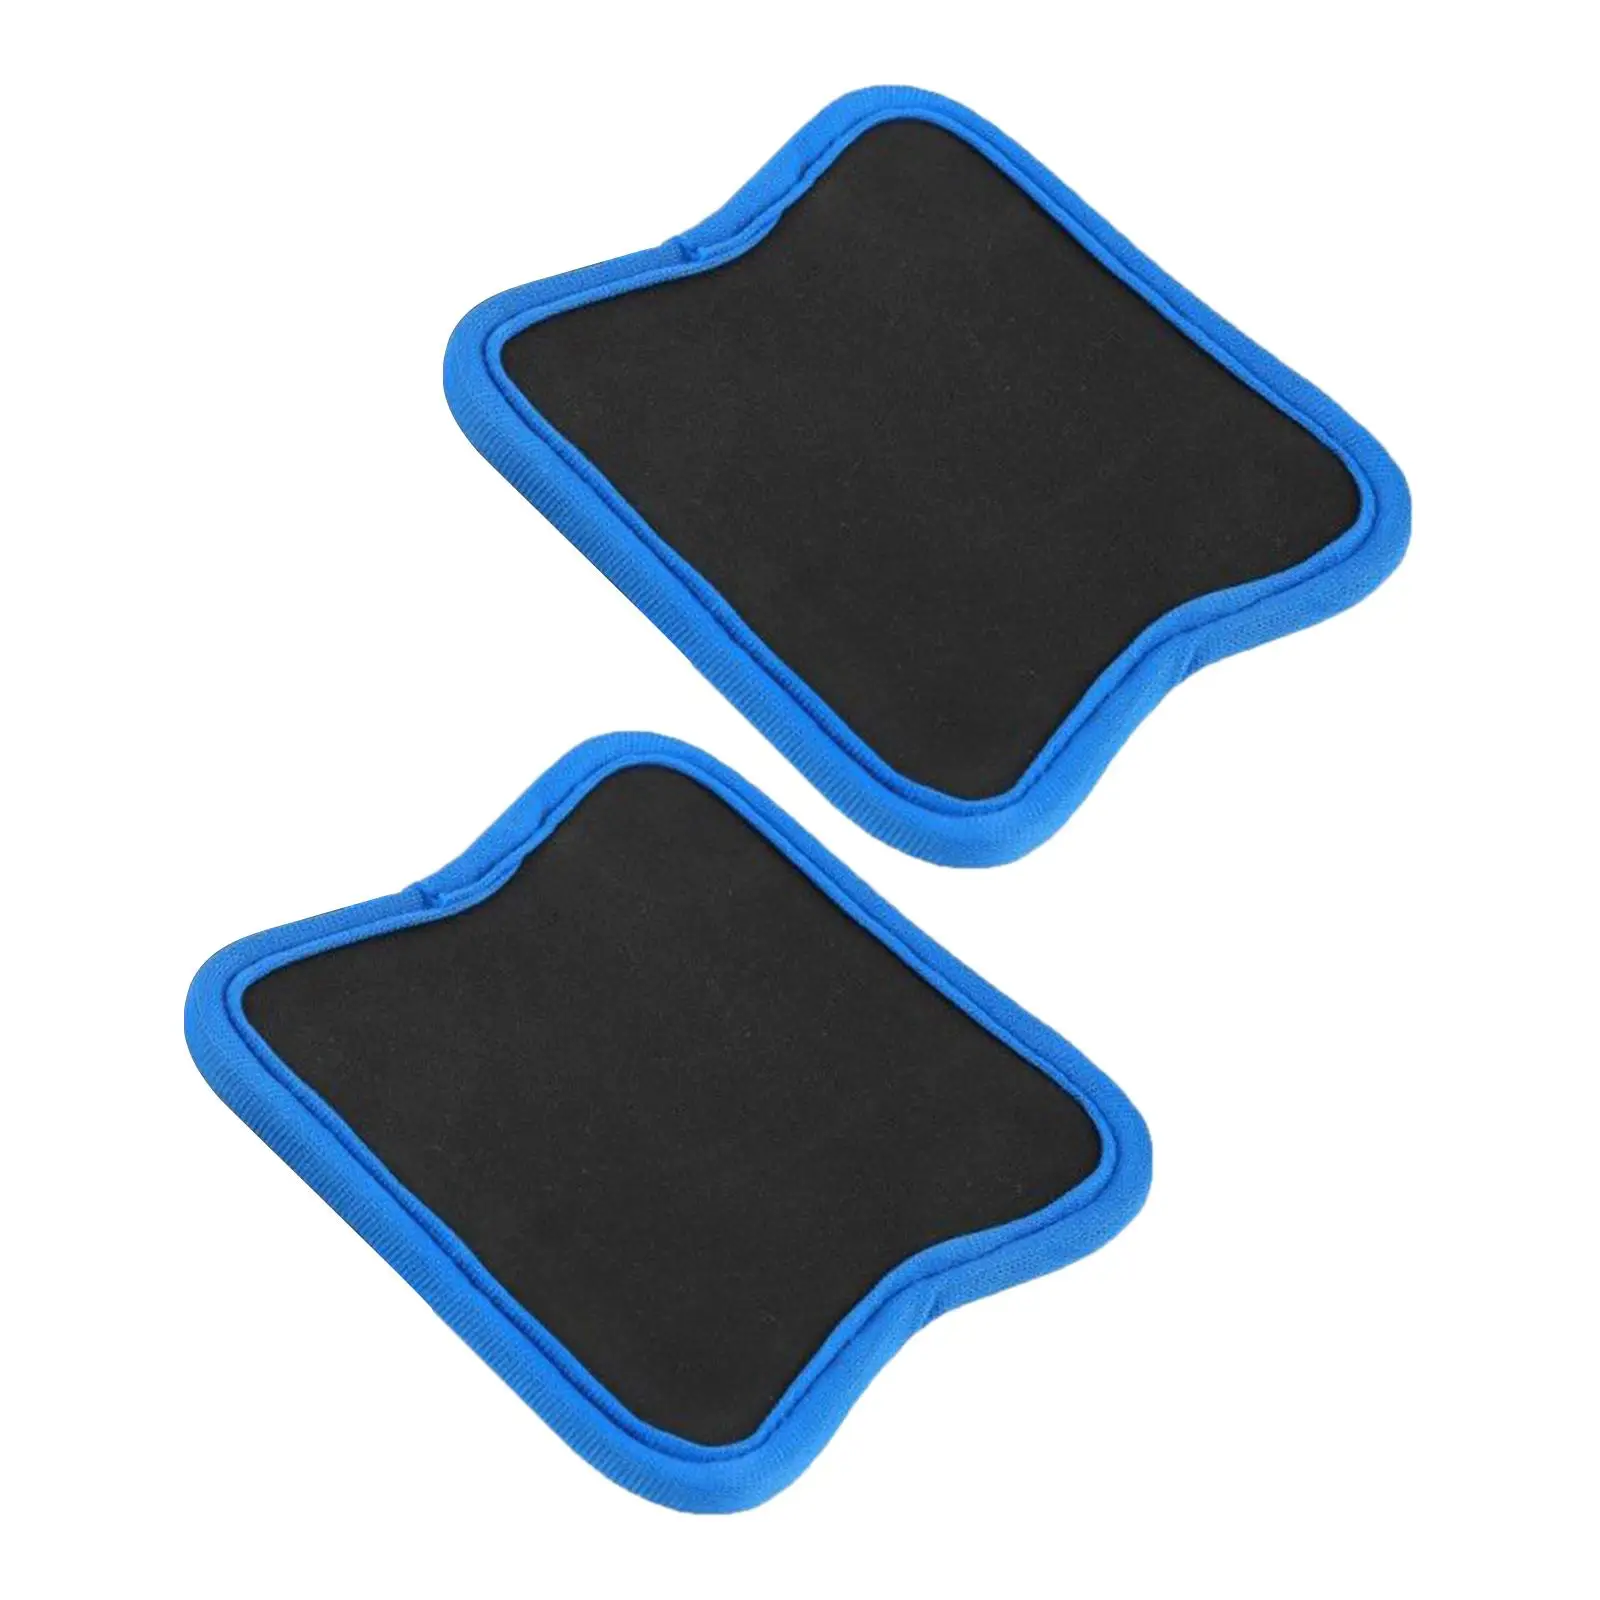 2 Pieces Neoprene Grip Pads Weightlifting Workout Pads for Fitness Women Men